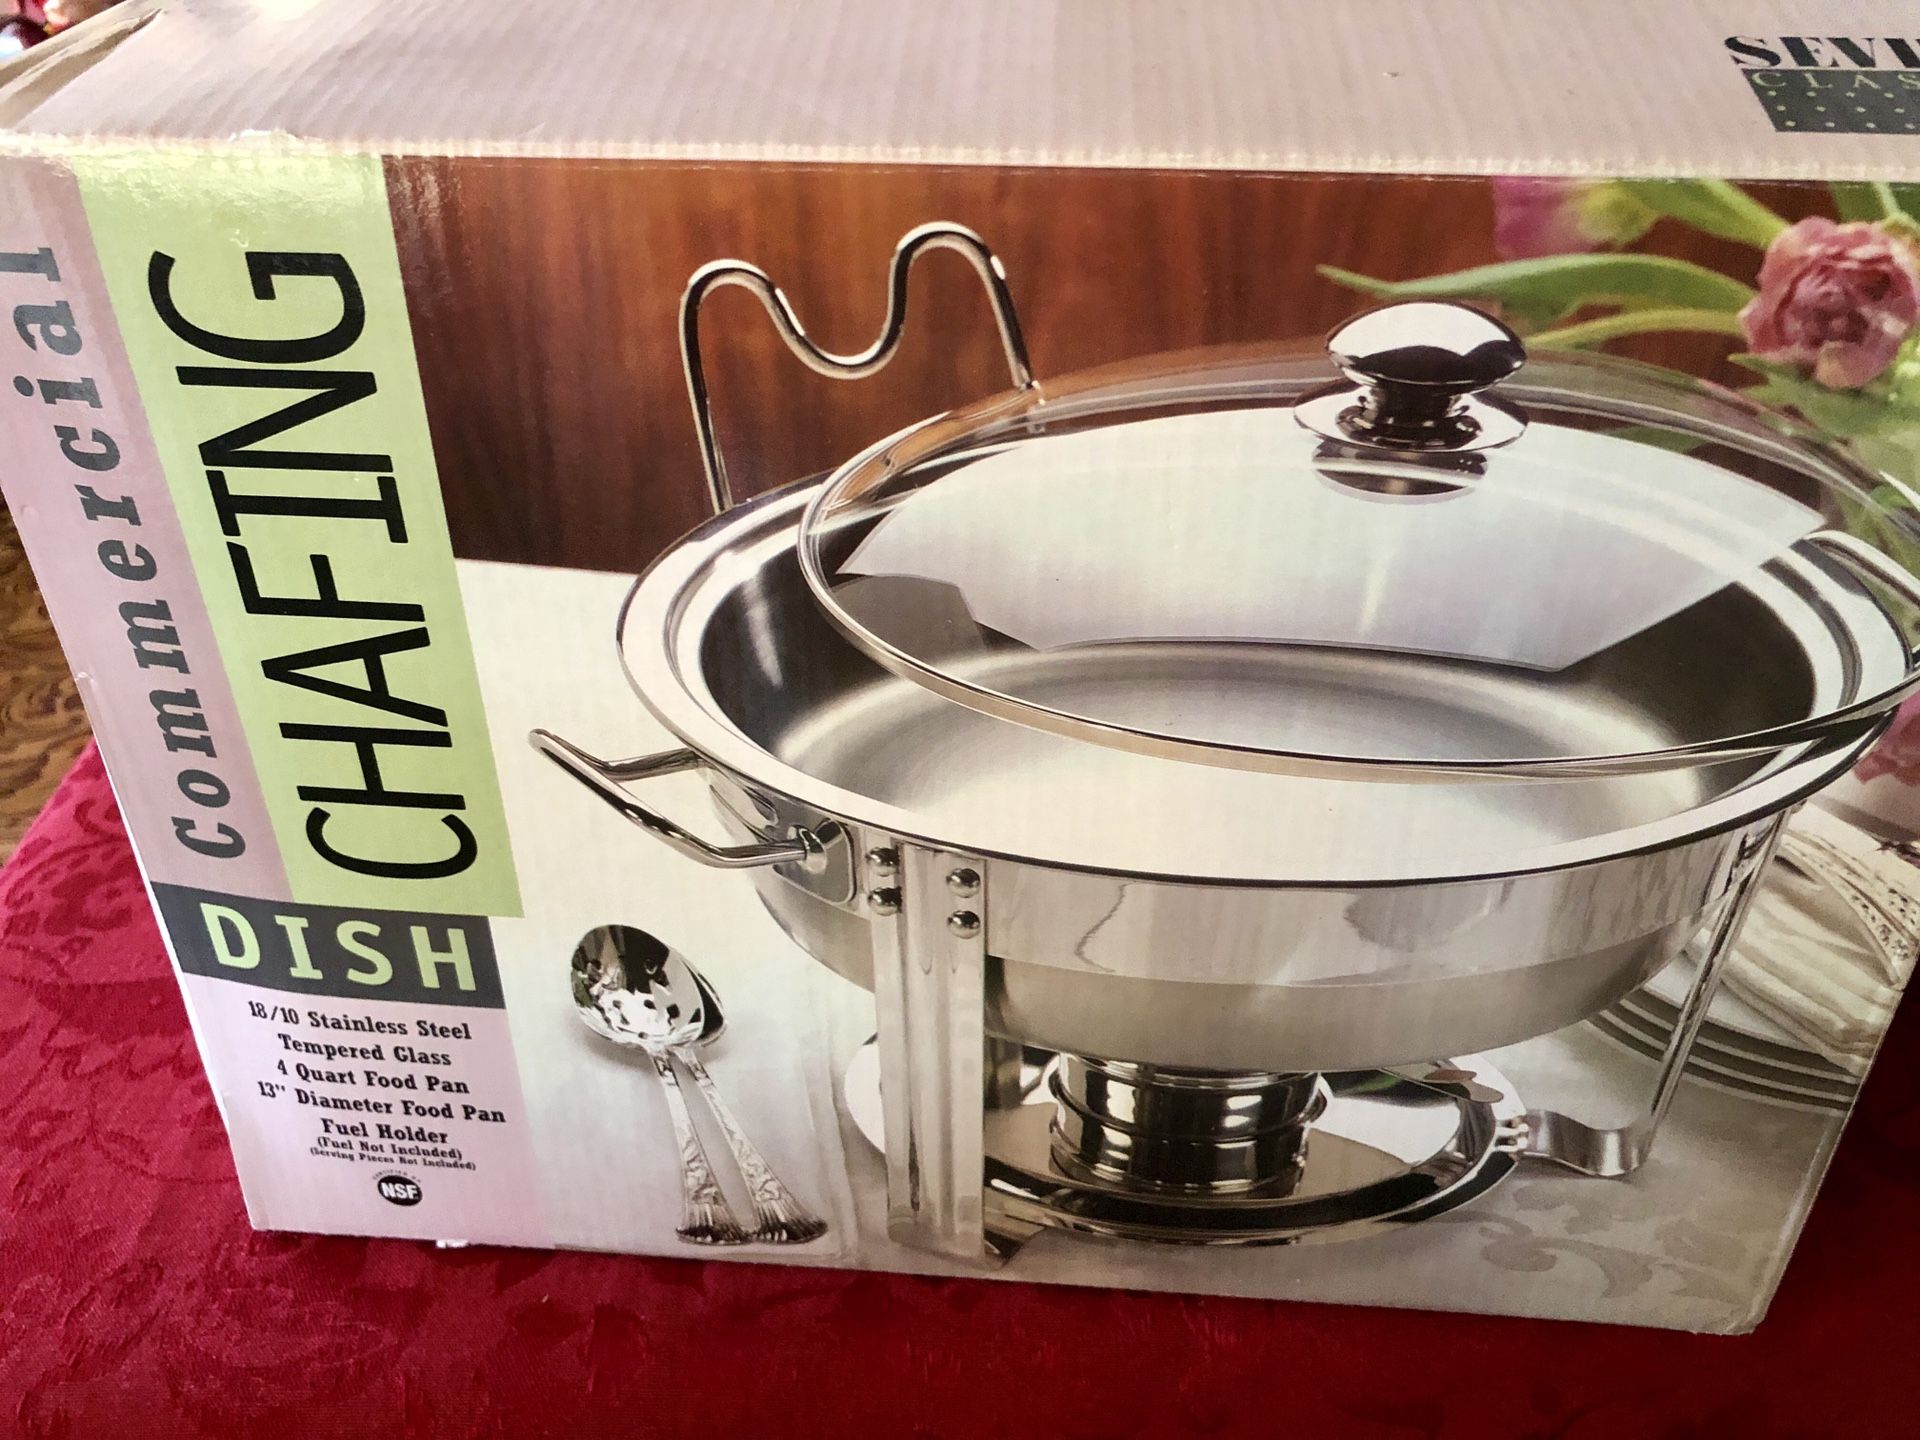 Chafing Dish Commercial Seville. Classic 4 Qt. Model#14009 Used Once In Original Box. Excellent Condition. $40. Firm.